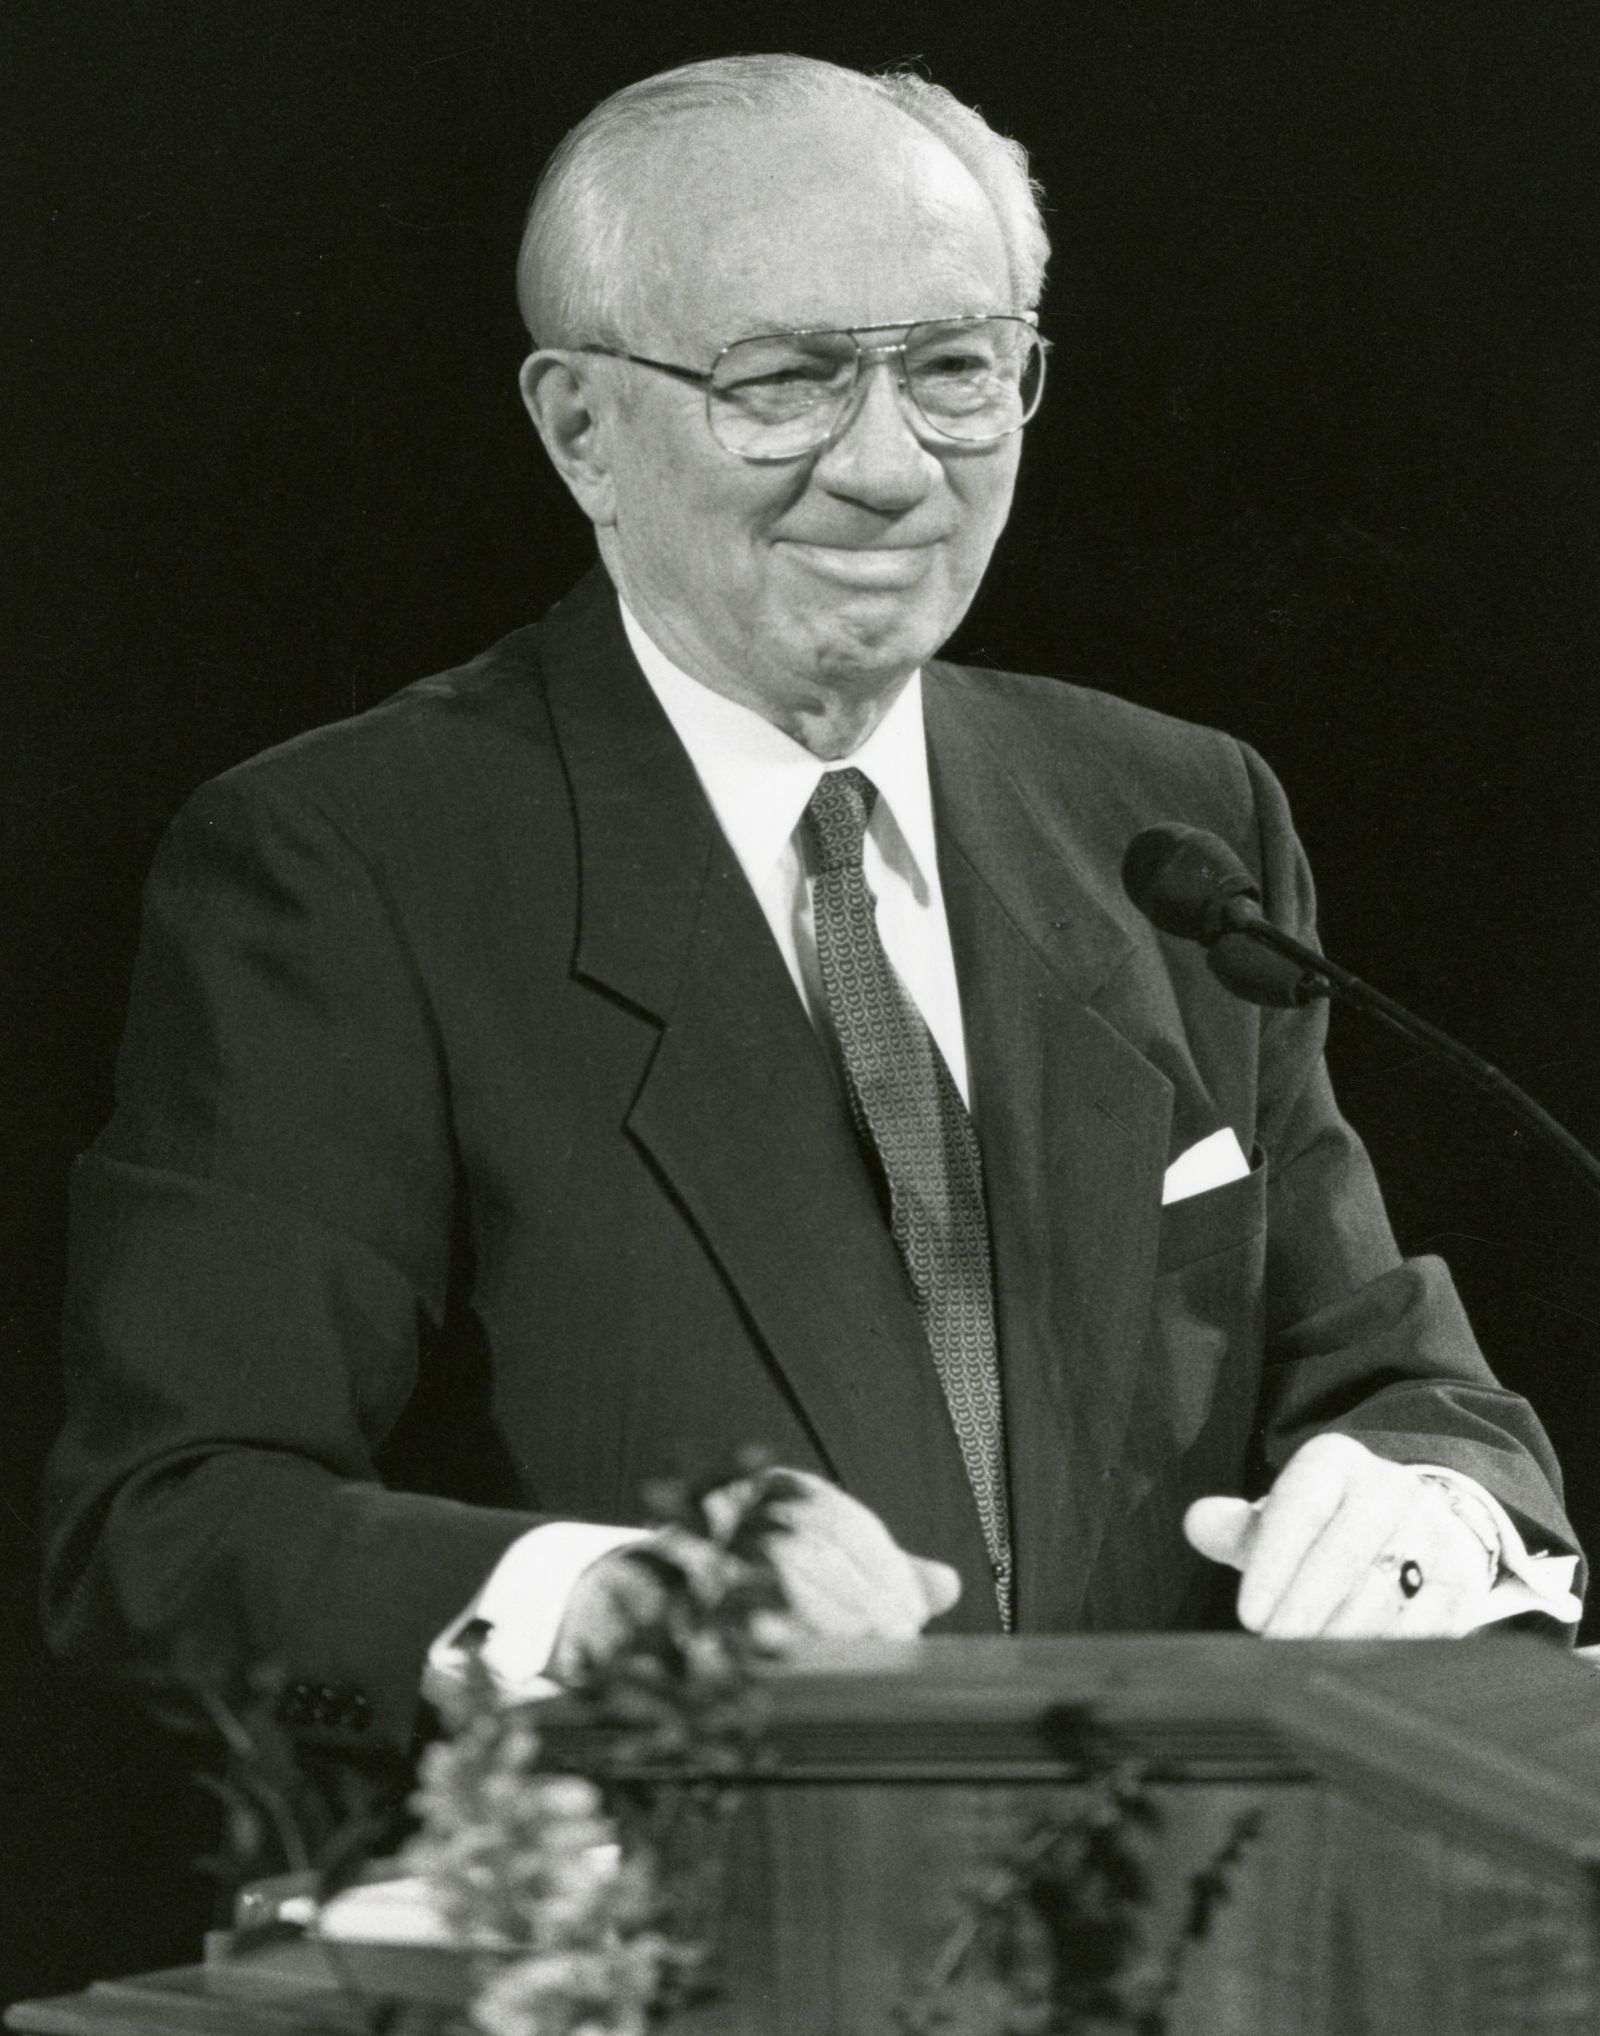 Gordon B. Hinckley speaking from the pulpit at General Conference.